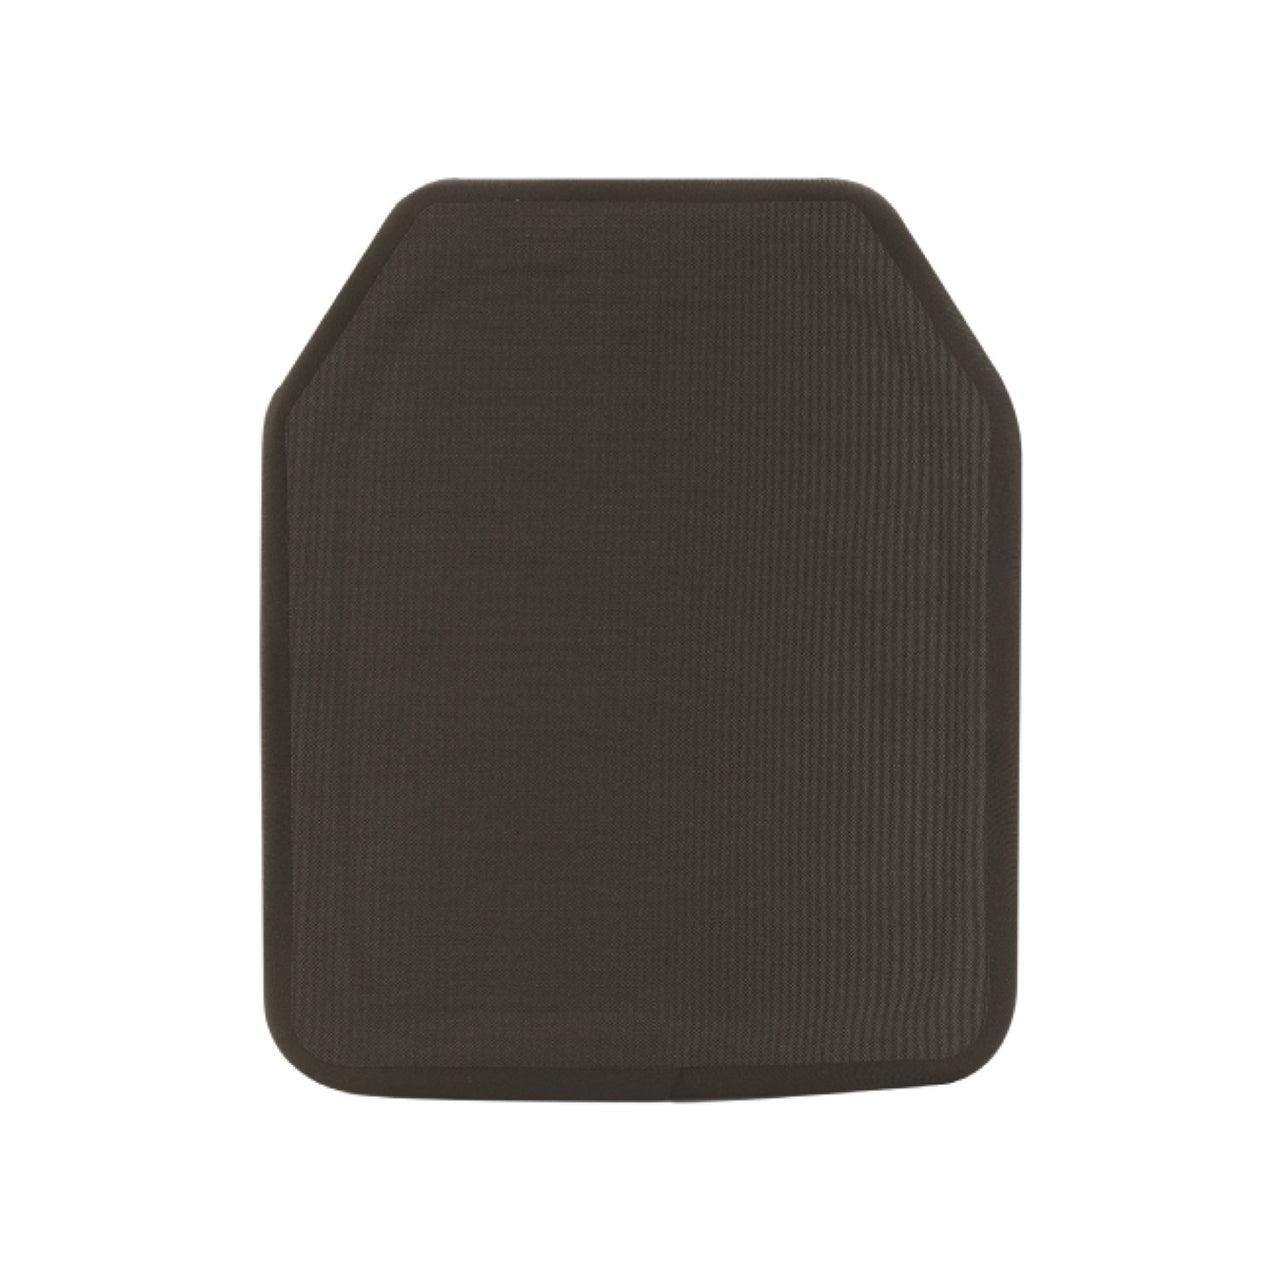 A Body Armor Direct Level III Lightweight Poly Plate on a white background.